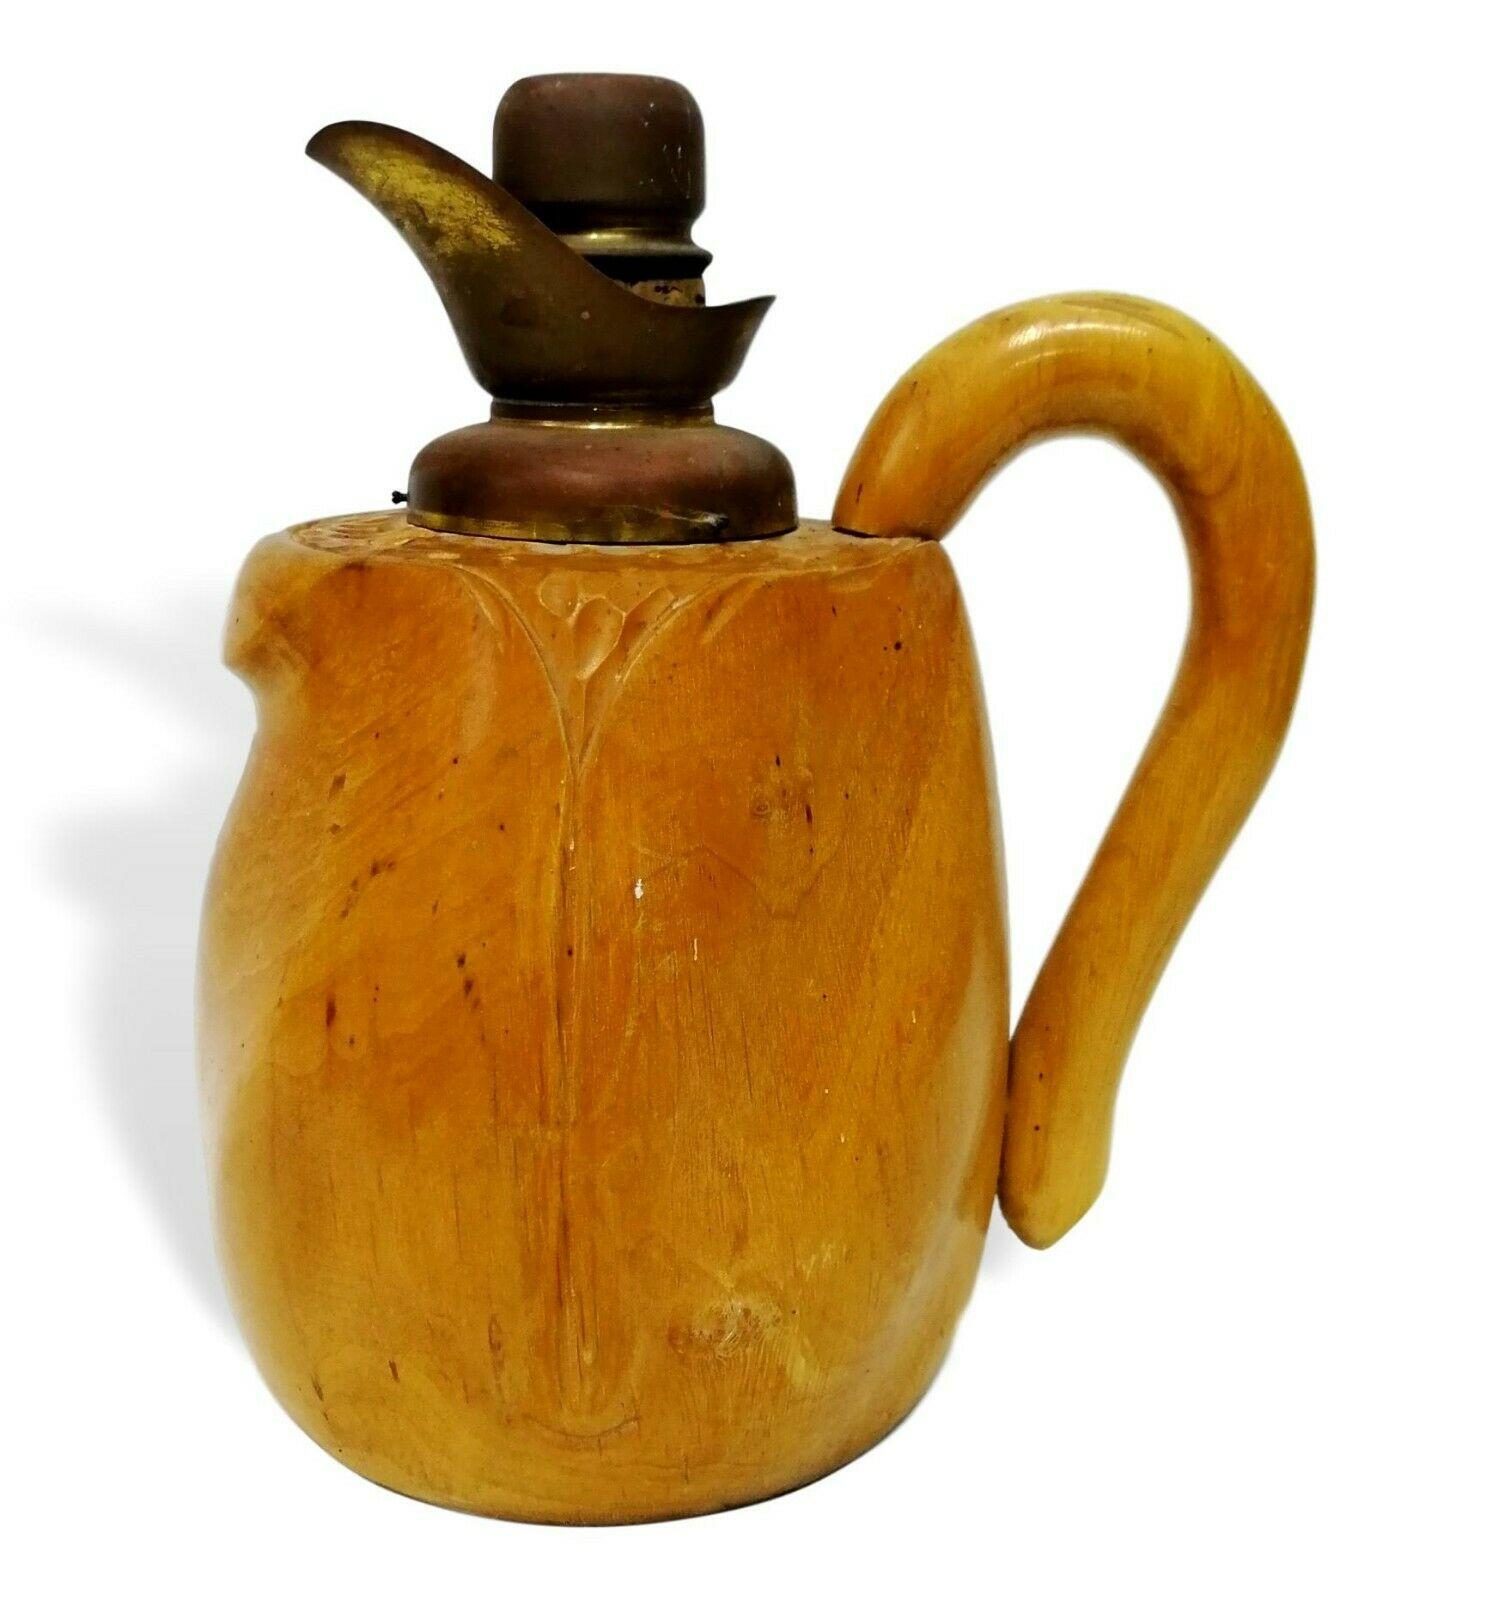 Wooden carafe macabo of drawing aldo tura

Measures 26 cm in height, 22 cm in width and 15 cm in depth, 

In very good storage conditions, as shown in photos, slight obvious signs of aging and use.